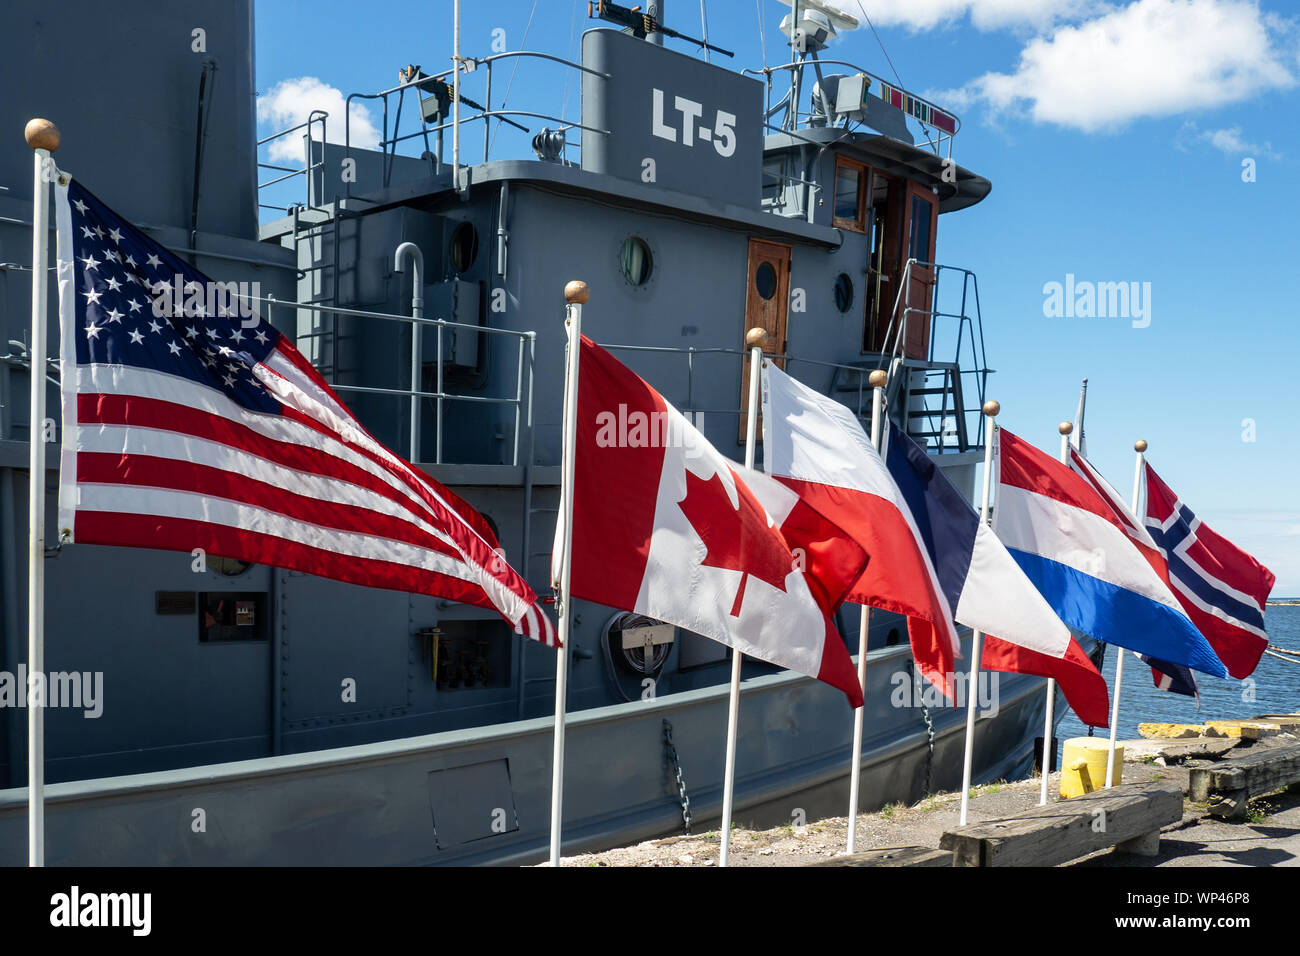 Oswego, New York, USA. September 6, 2019. Country flags in front of  the World War II tug boat the LT-5 on display at the H. Lee White Maritime Museum Stock Photo